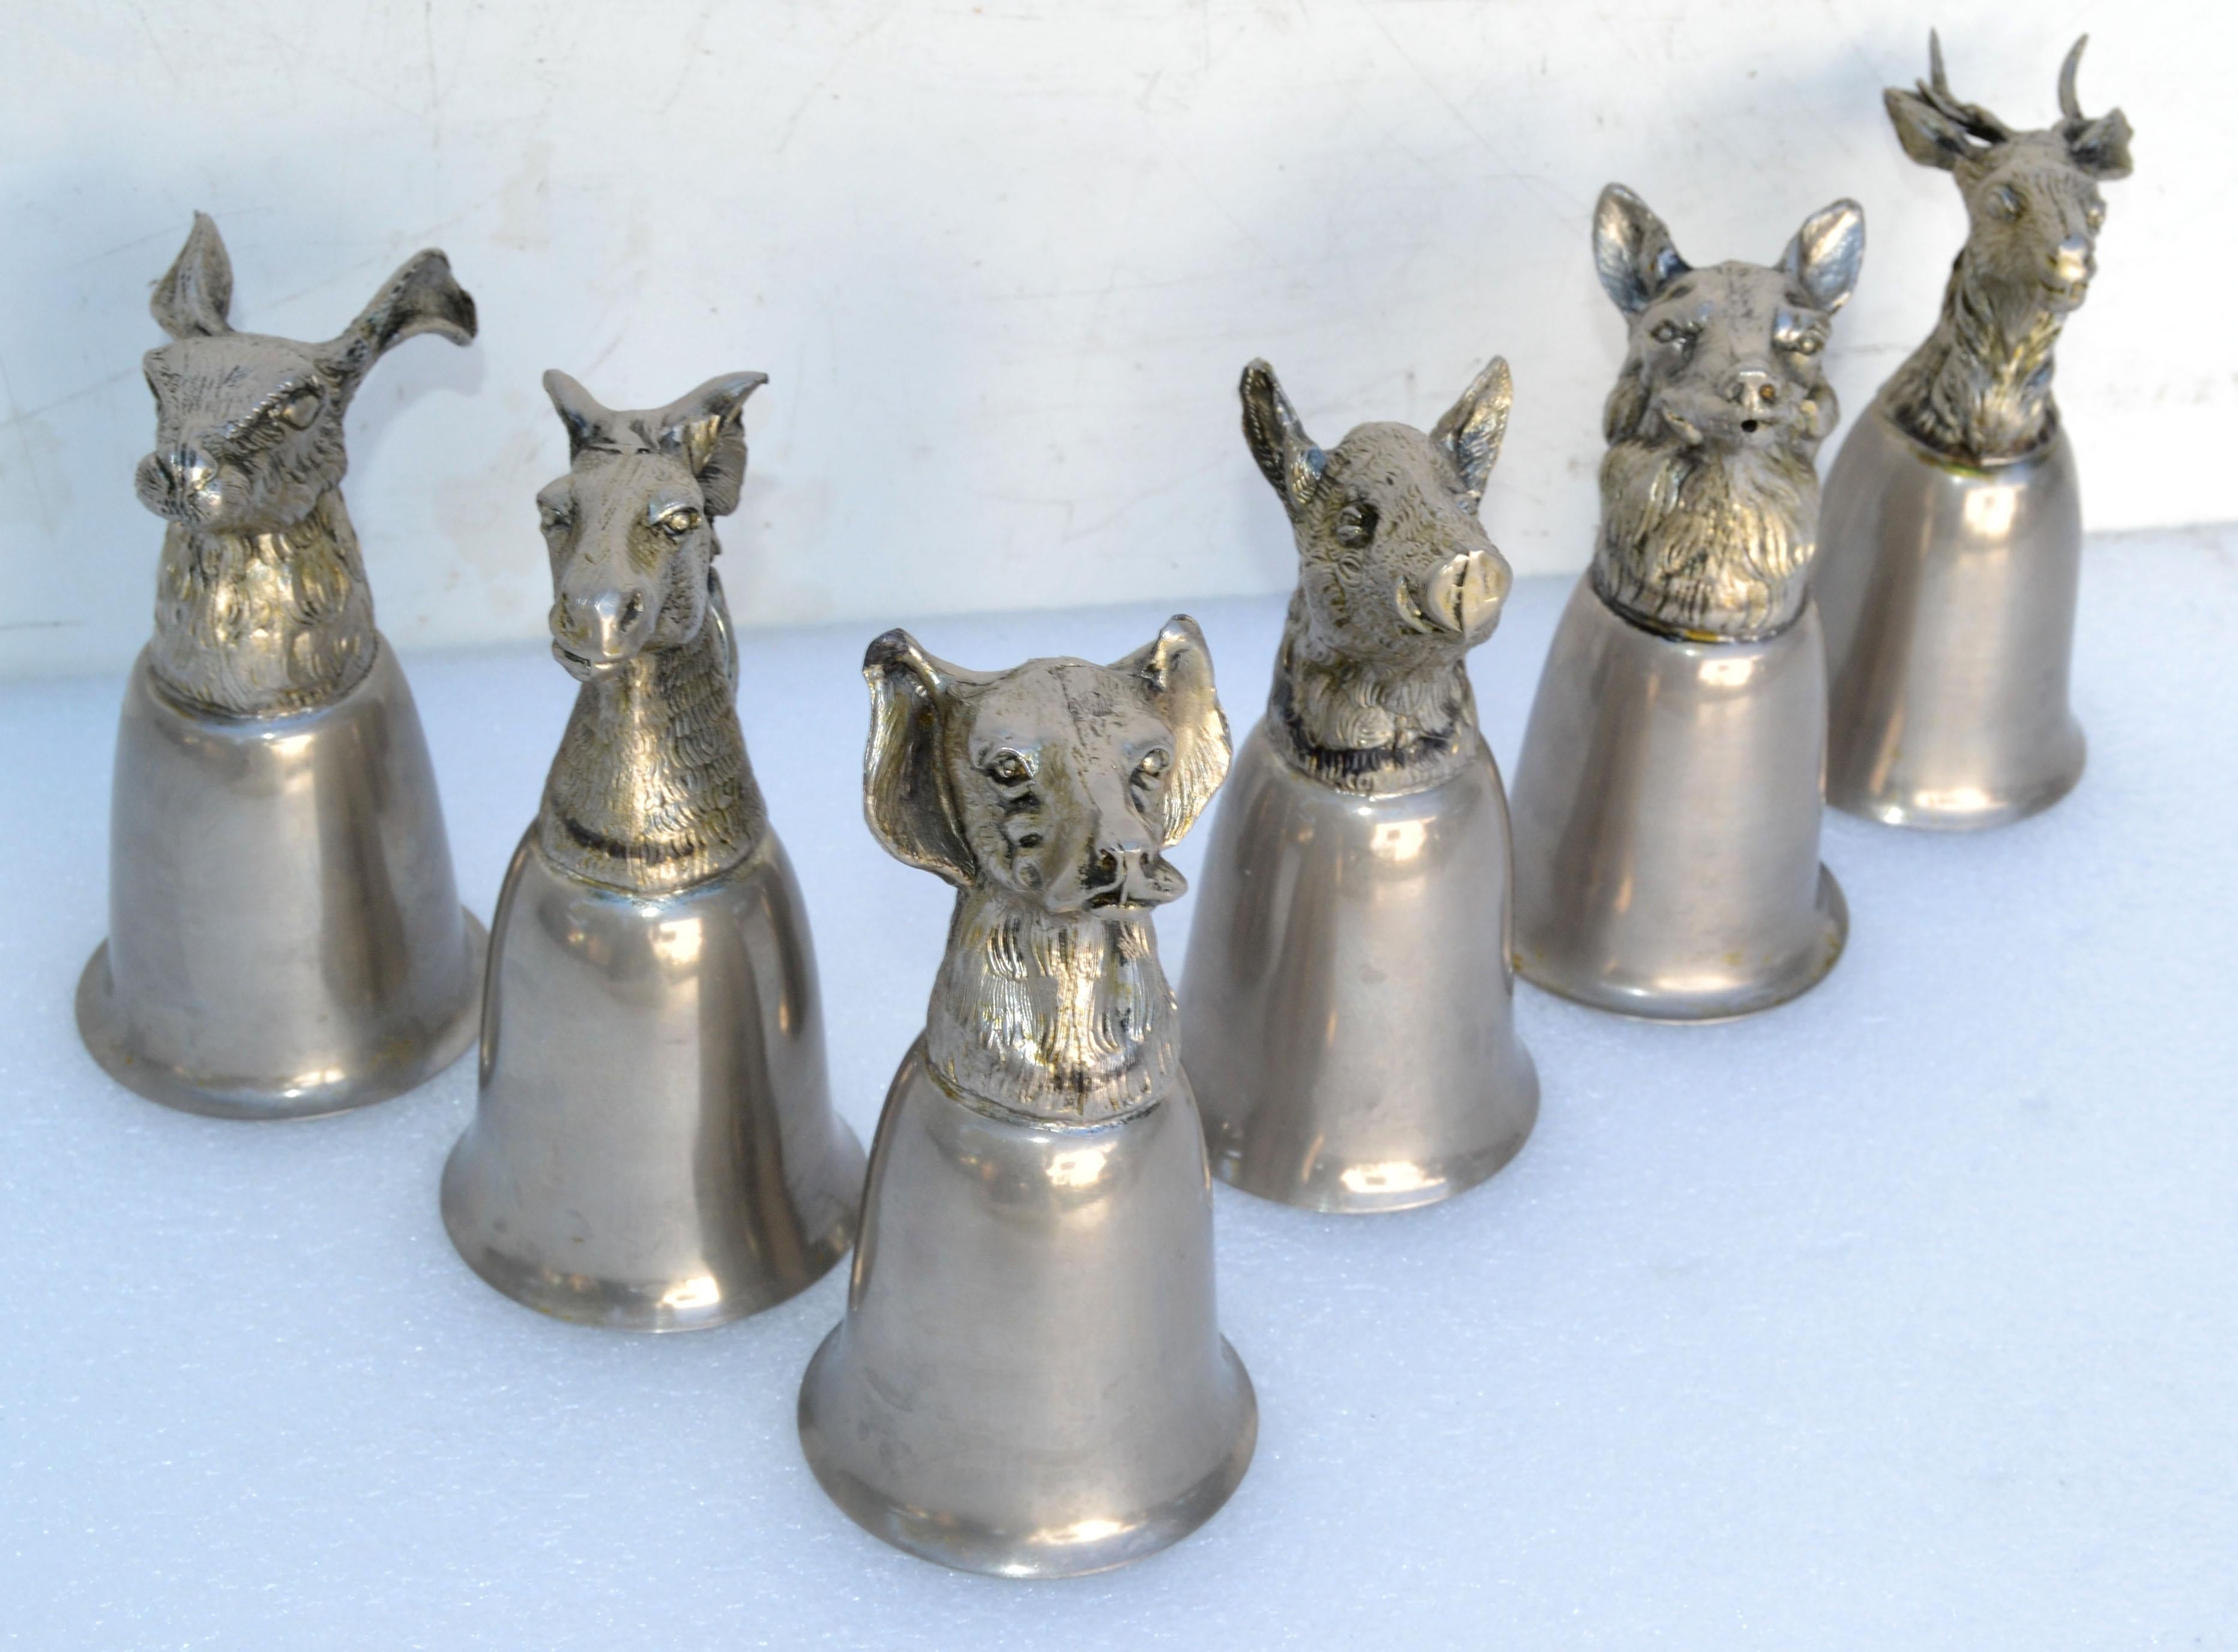 Six Mauro Manetti silver plate animal heads stirrup, goblets, cups, made in Italy.
We have the Hunting collection of a german shepherd, labrador, sheep, rabbit, donkey, boar.
All marked MM Italy.